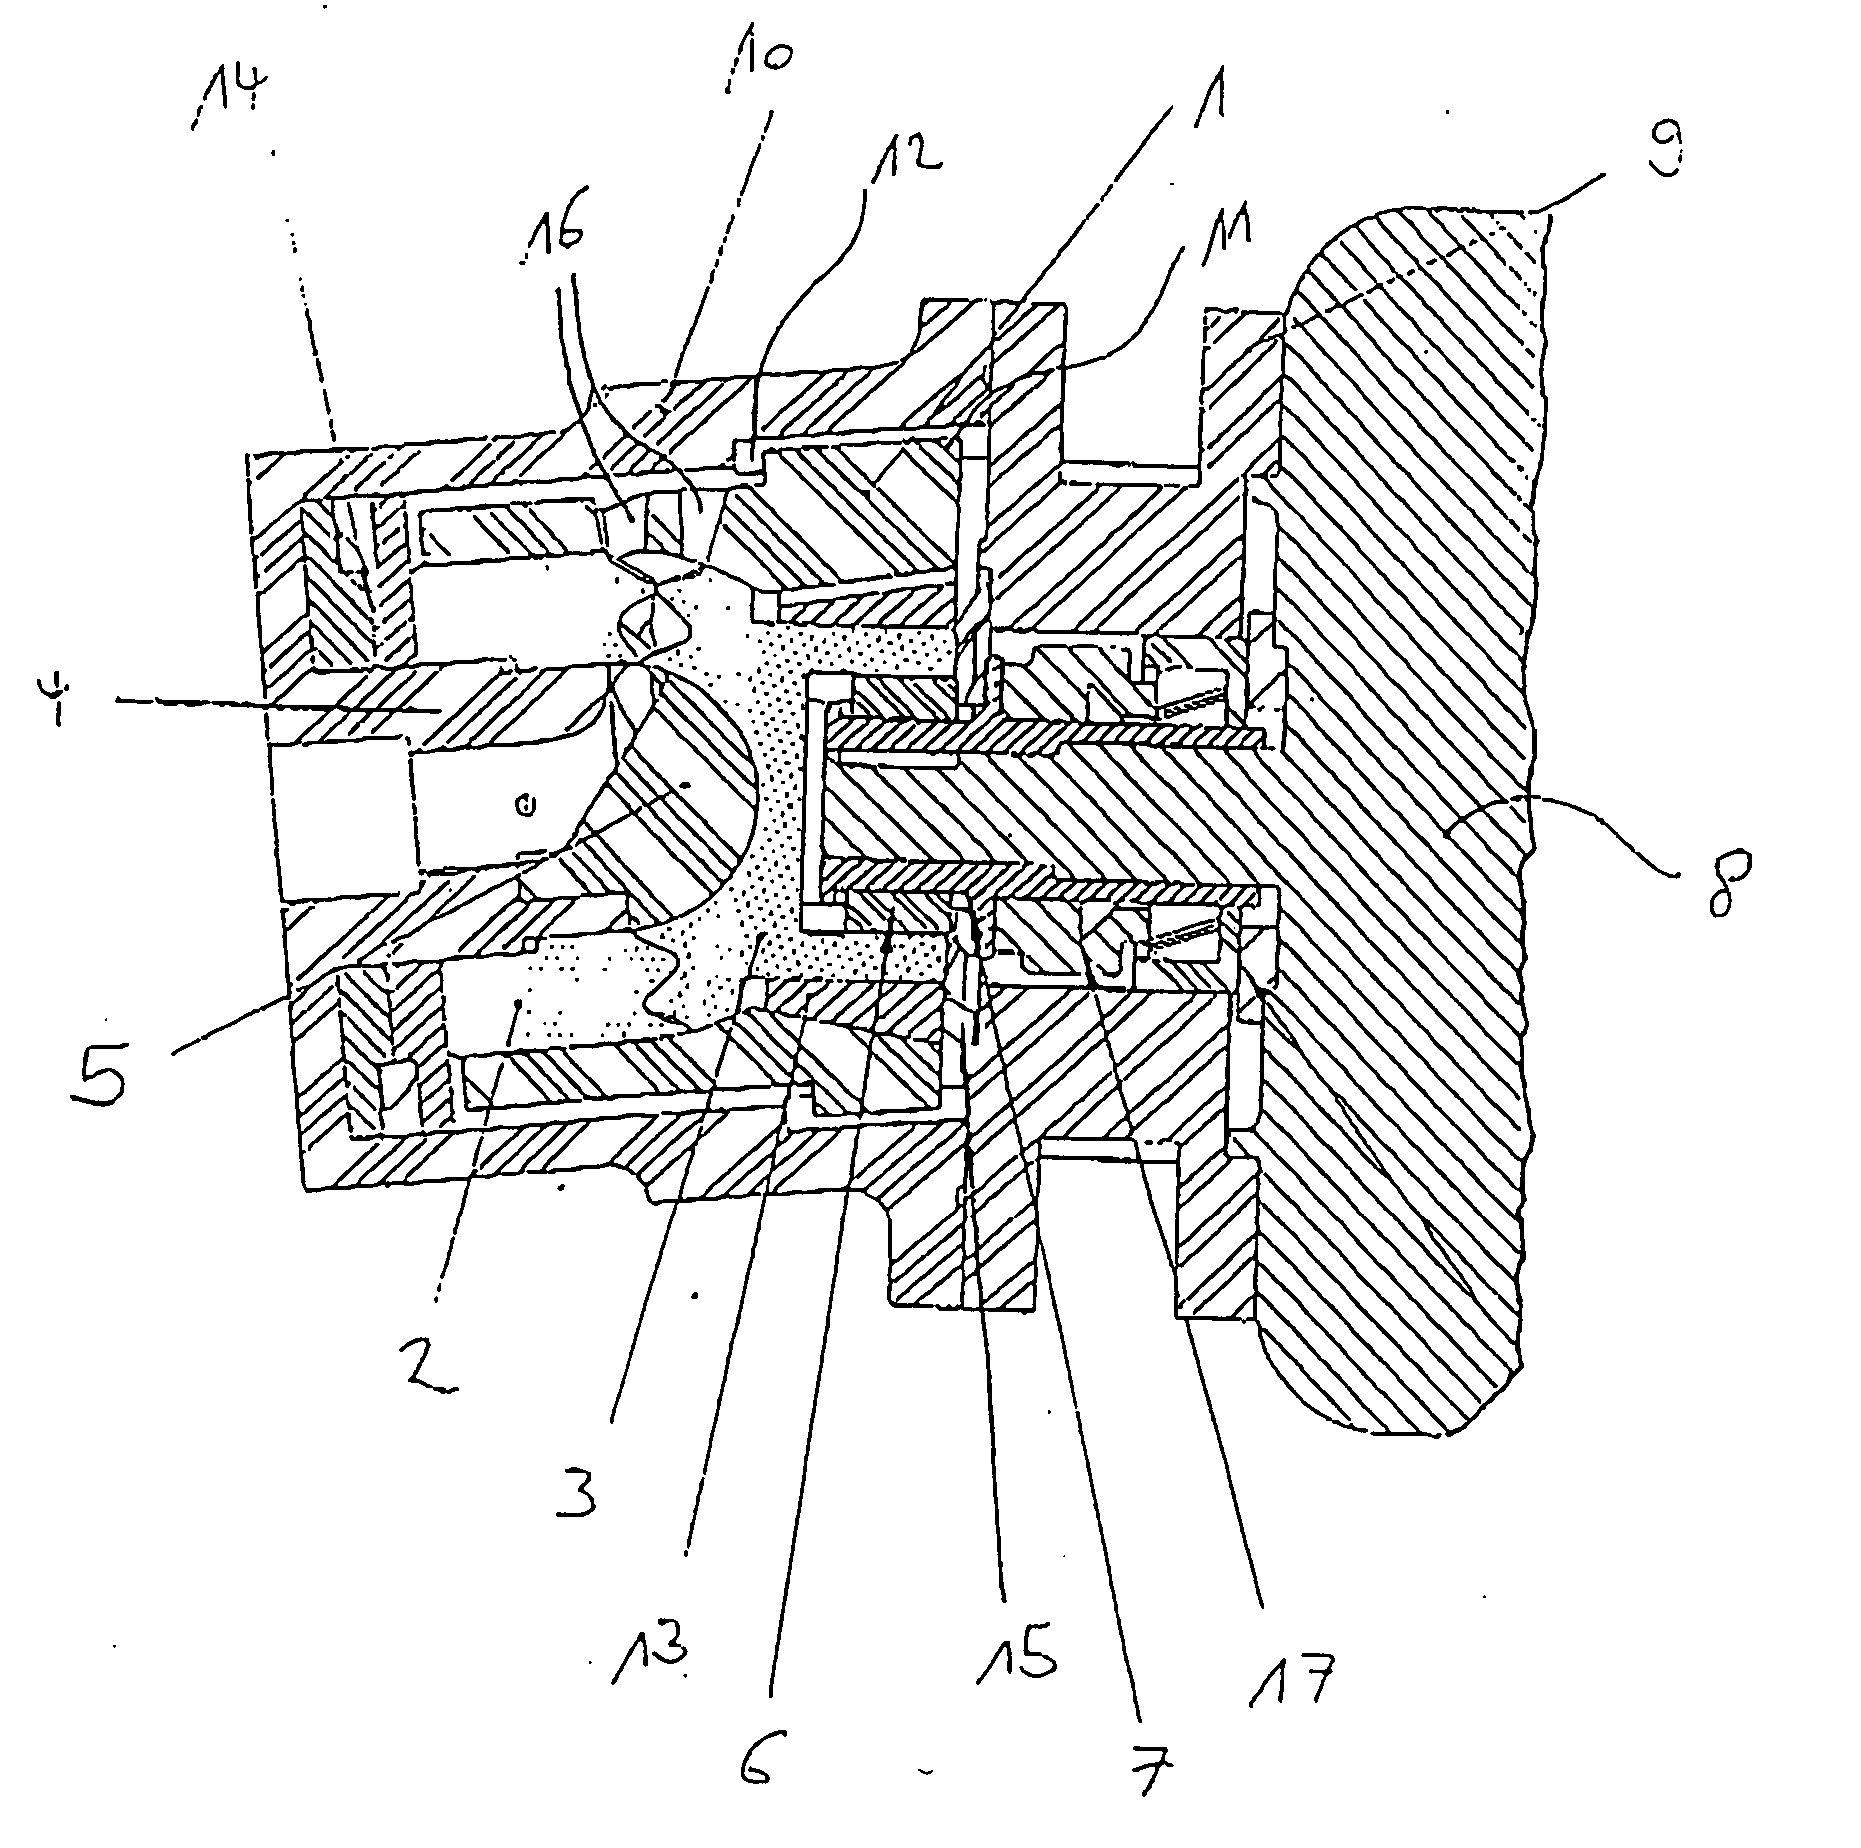 Rotary piston machines comprising a displaceable inner housing